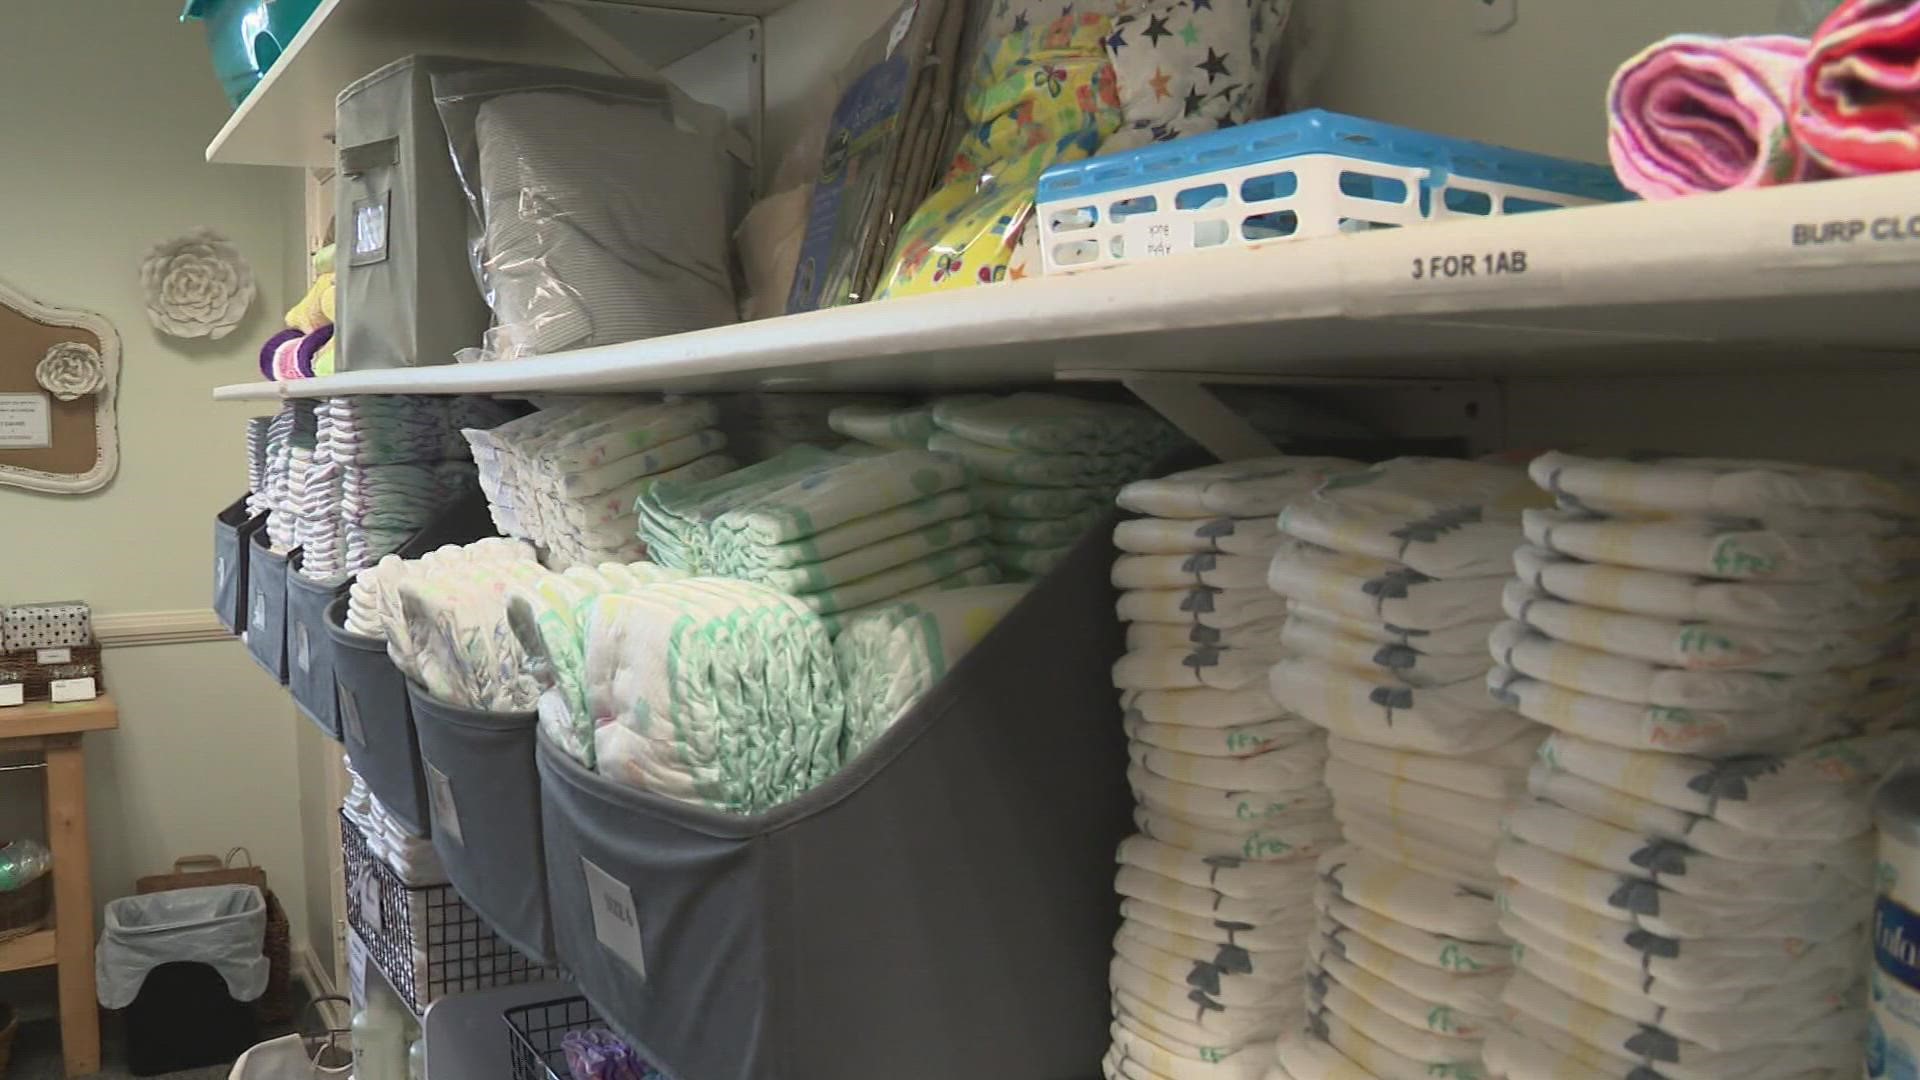 The group says with help from community partners and churches, their donations have allowed them to serve more than 1,000 families with necessities.